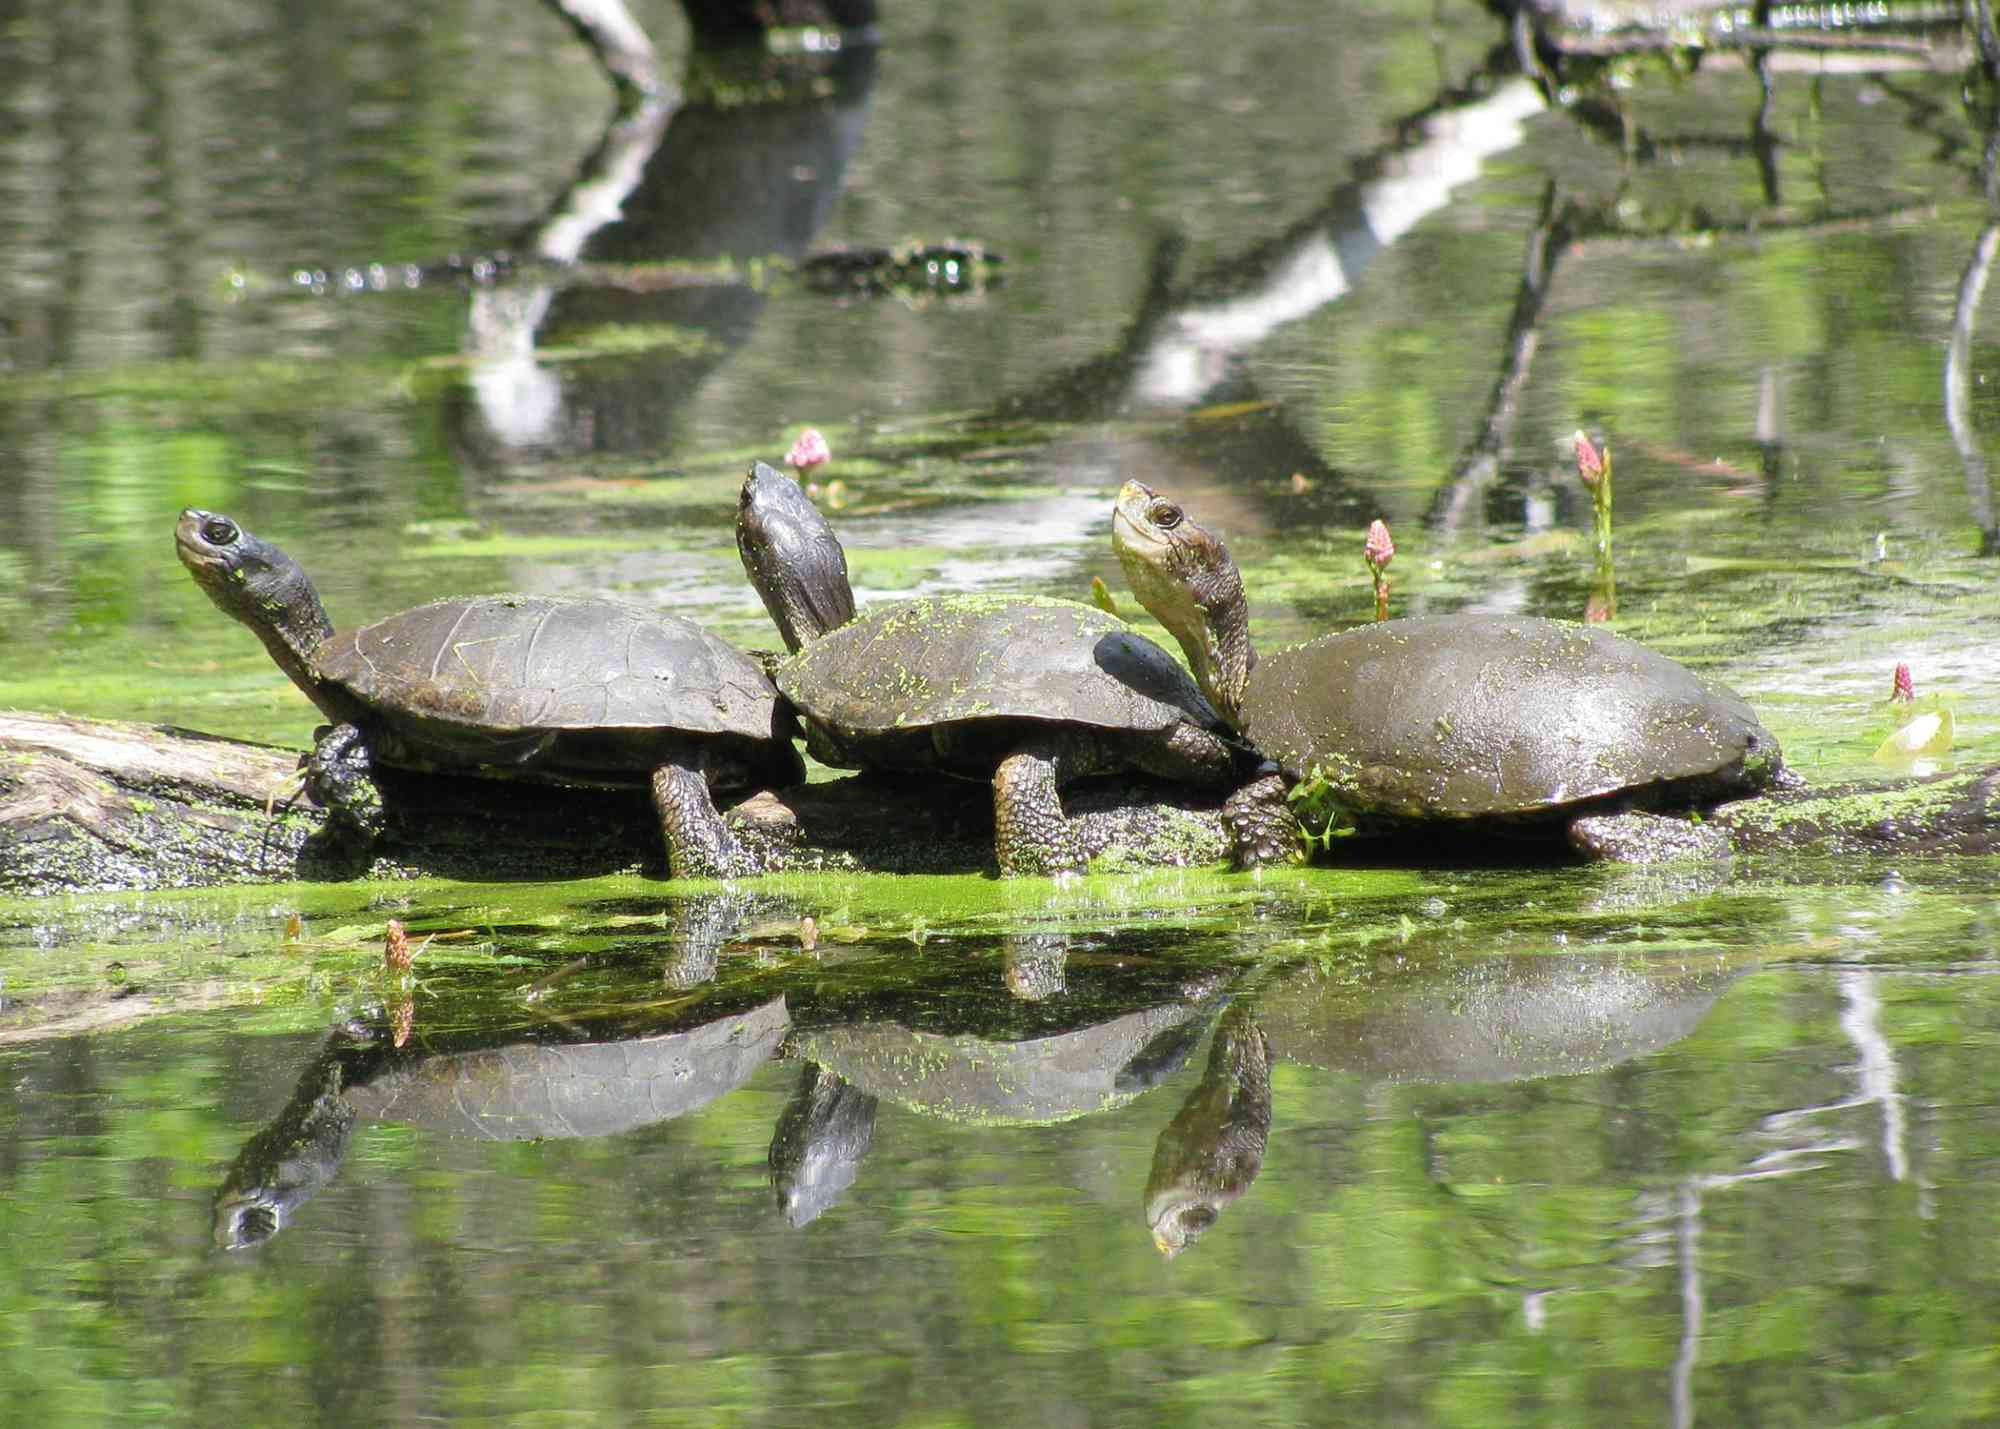 18.02.2016_Three western pond turtles sitting together_Oregon Department of Fish and Wildlife (CC BY-SA 2.0 DEED)